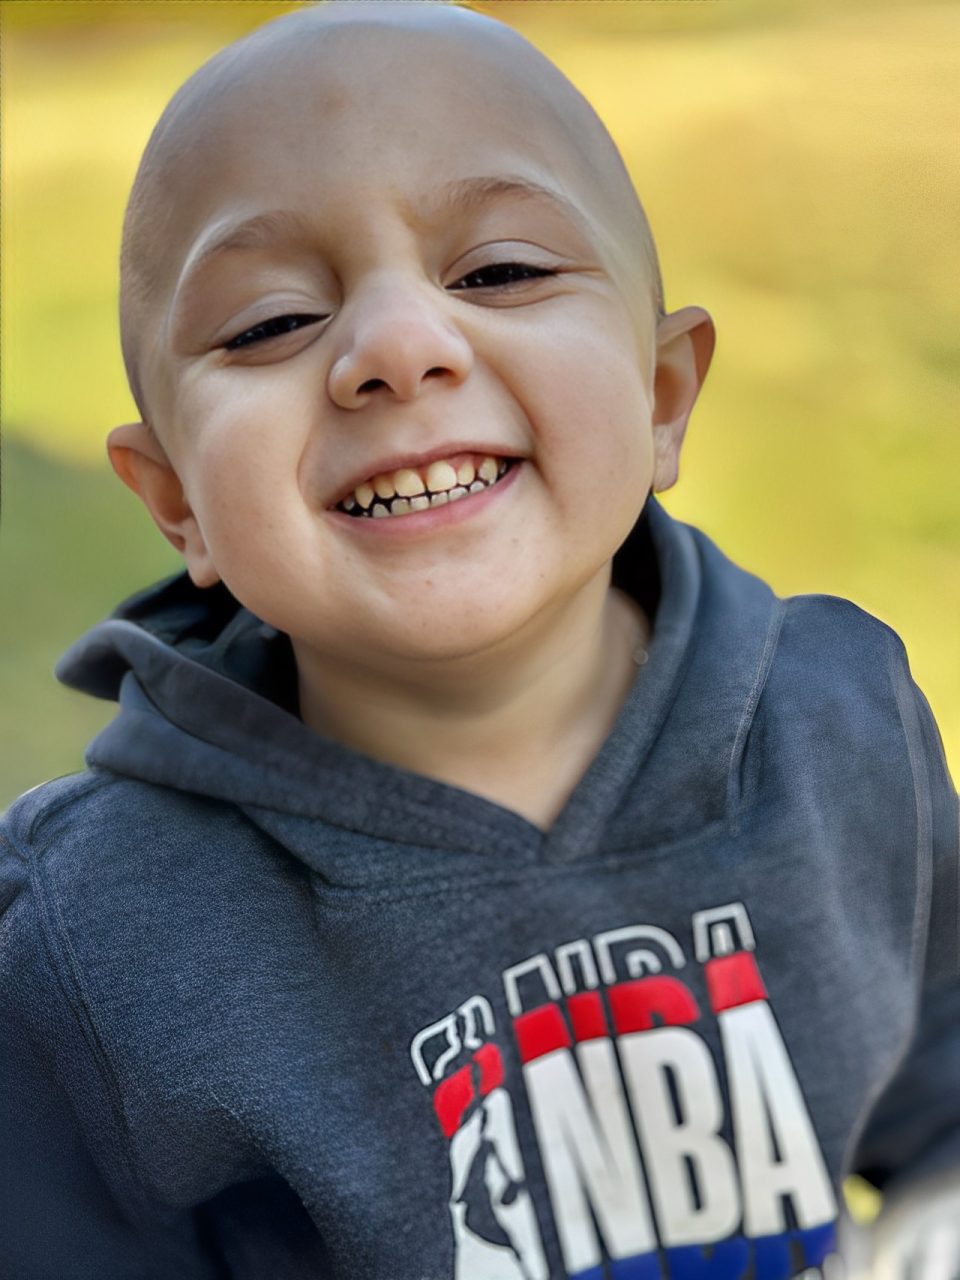 Diagnosed with retinoblastoma at 22 months, Yasin has completed six rounds of chemotherapy, five intravitreal chemotherapy injections and radiation to kill the tumor.- St. Baldrick’s Foundation